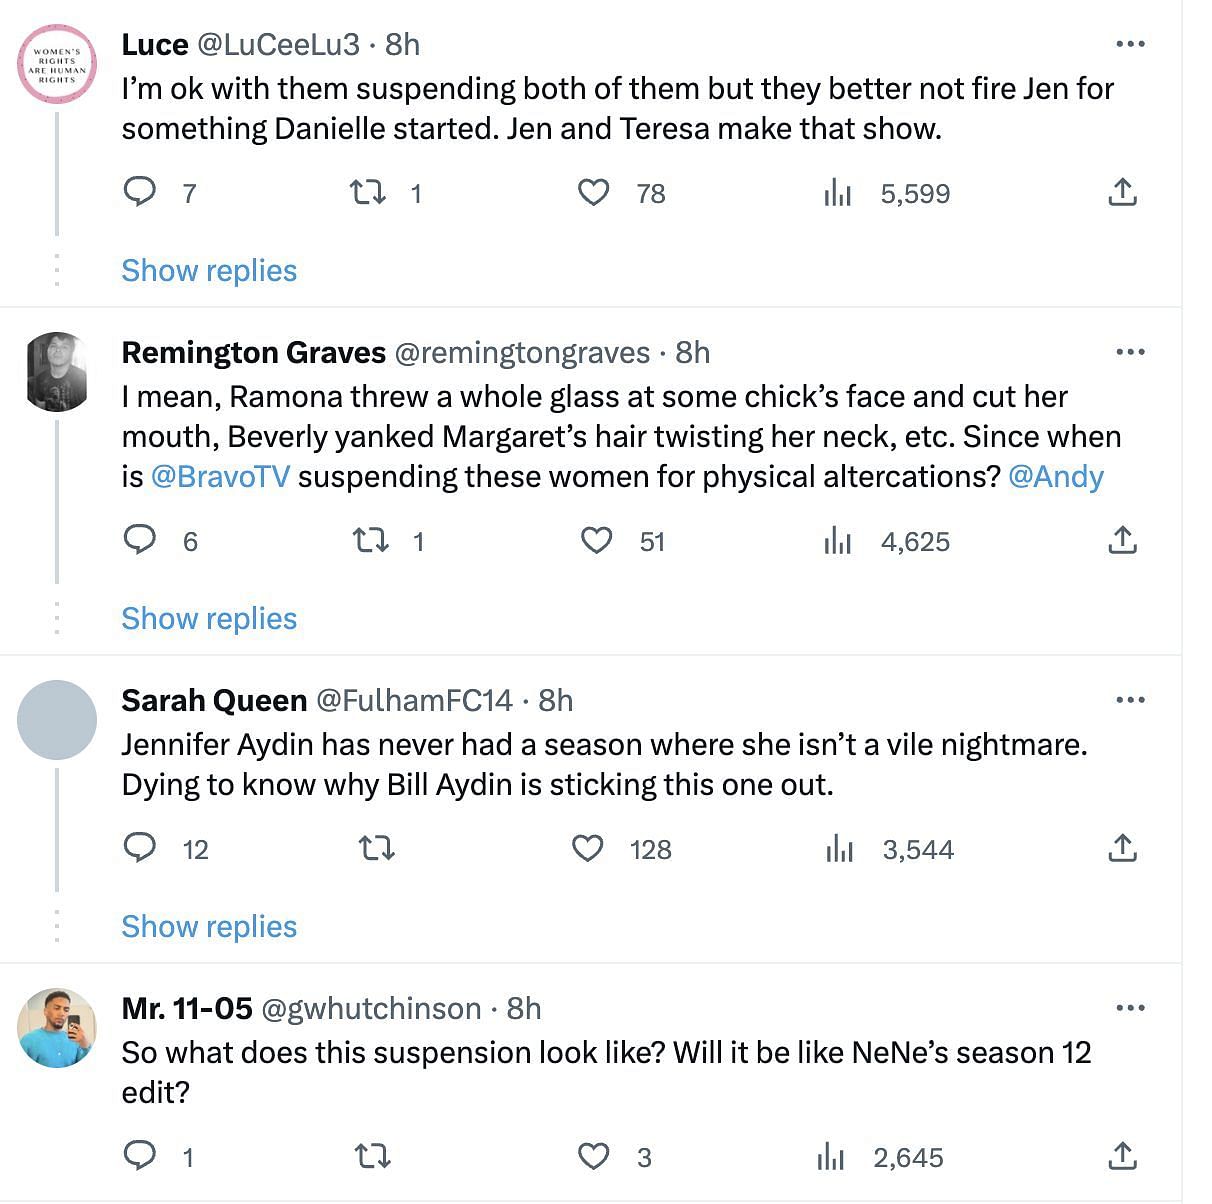 Social media users pick sides as The Real Housewives of New Jersey stars get into a physical altercation: More details revealed as Aydin and Cabral get suspended. (Image via X)